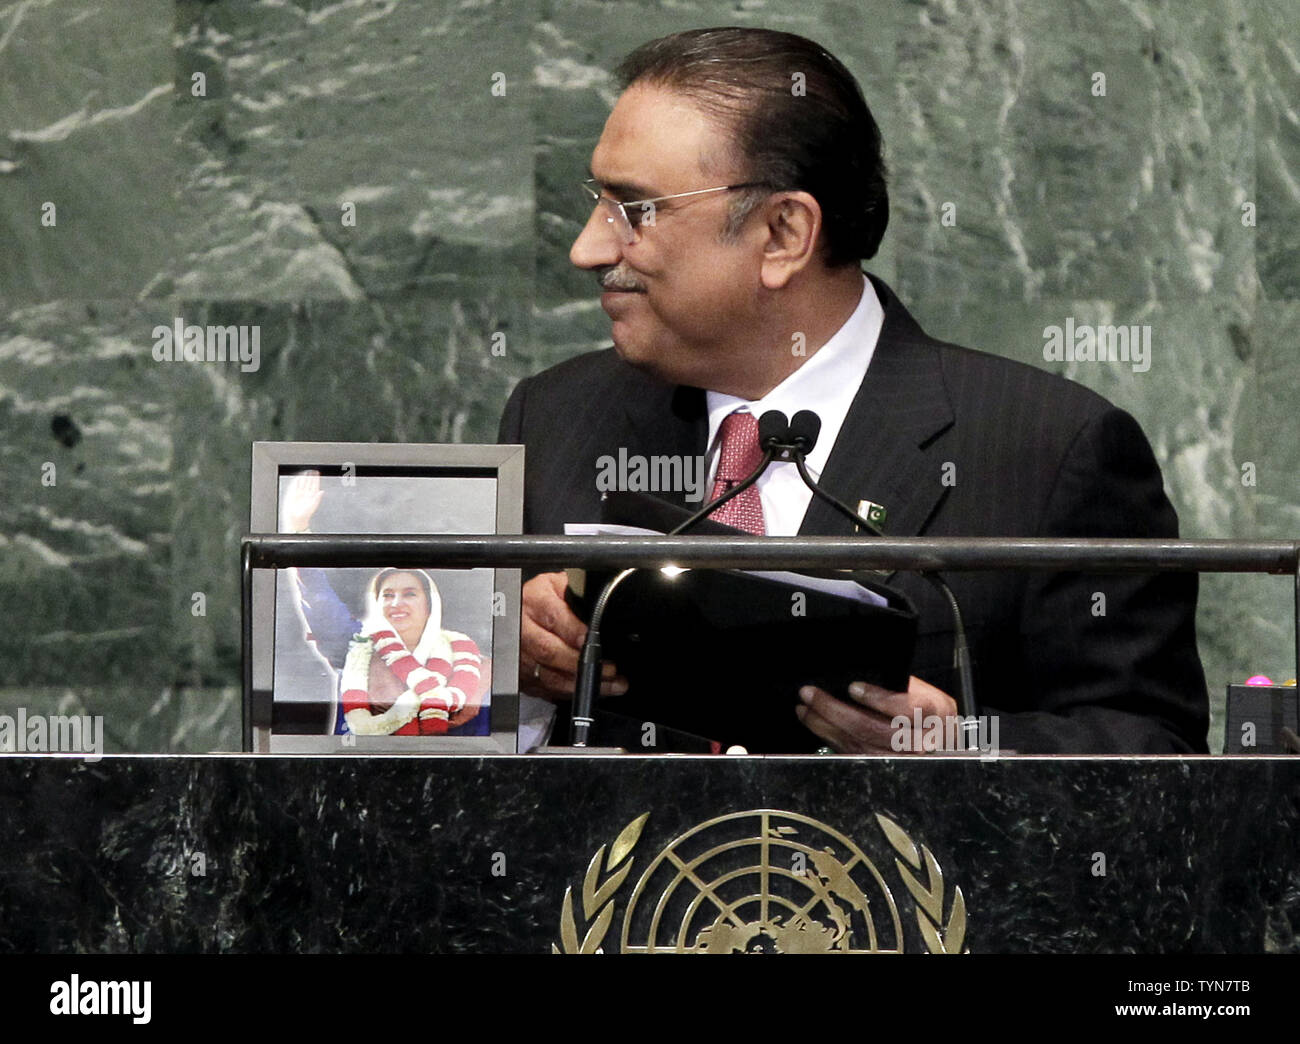 His Excellency Asif Ali Zardari, President of the Islamic Republic of Pakistan addresses the United Nations with a photo of the late Prime Minister Benazir Bhutto to his right at the 67th United Nations General Assembly in the UN building in New York City on September 25, 2012. Bhutto, who was assassinated in 2007.    UPI/John Angelillo Stock Photo